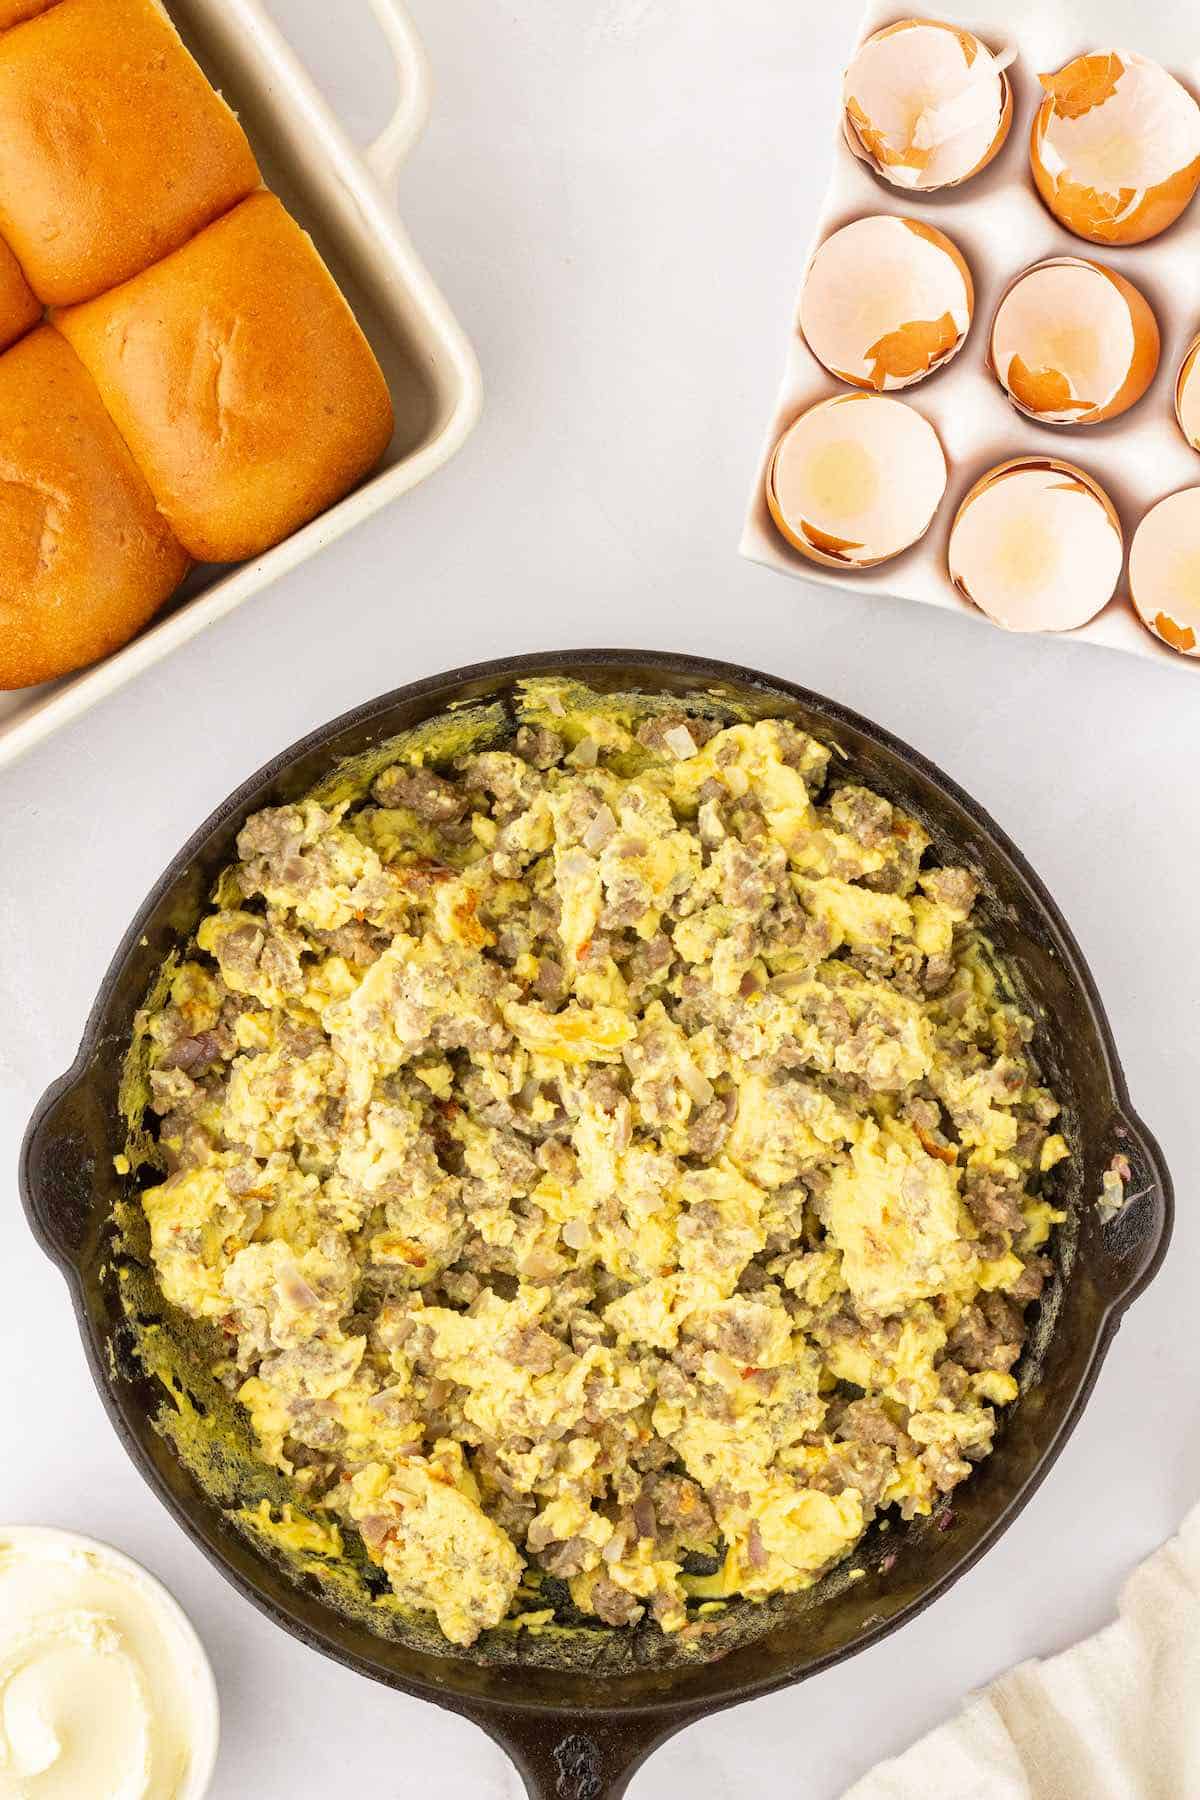 Scrambled eggs and pork sausage in a cast iron skillet.